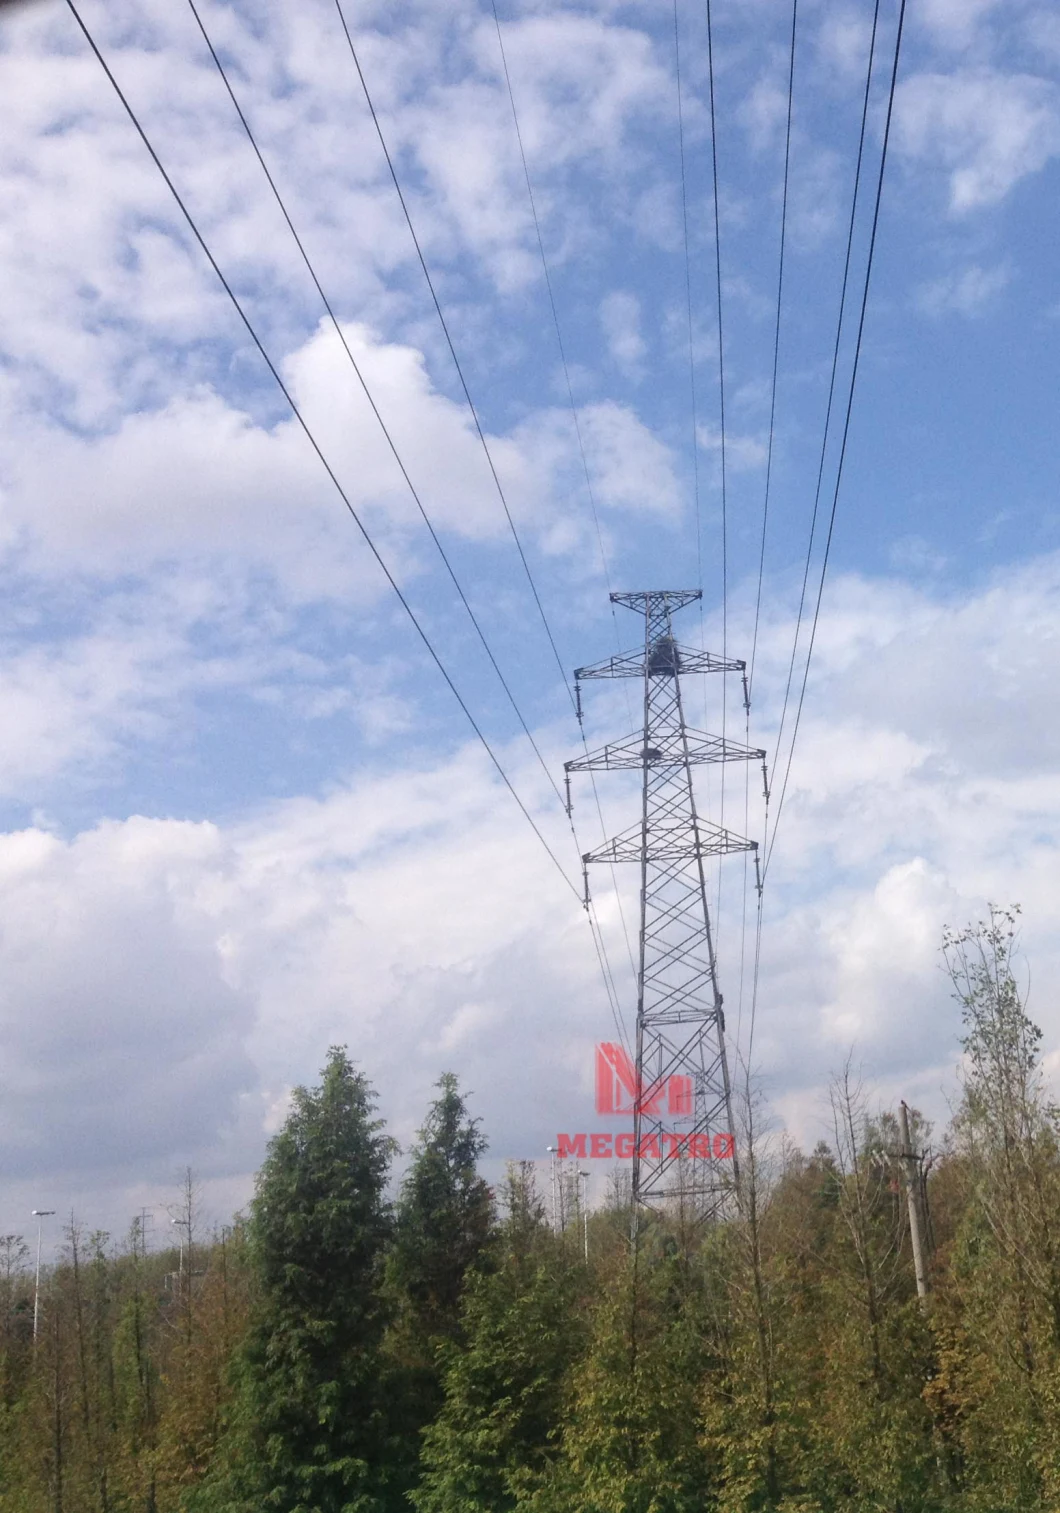 Megatro Lines Towers with 110kv Double Circuit Light Suspension Type Transmission Line Styles